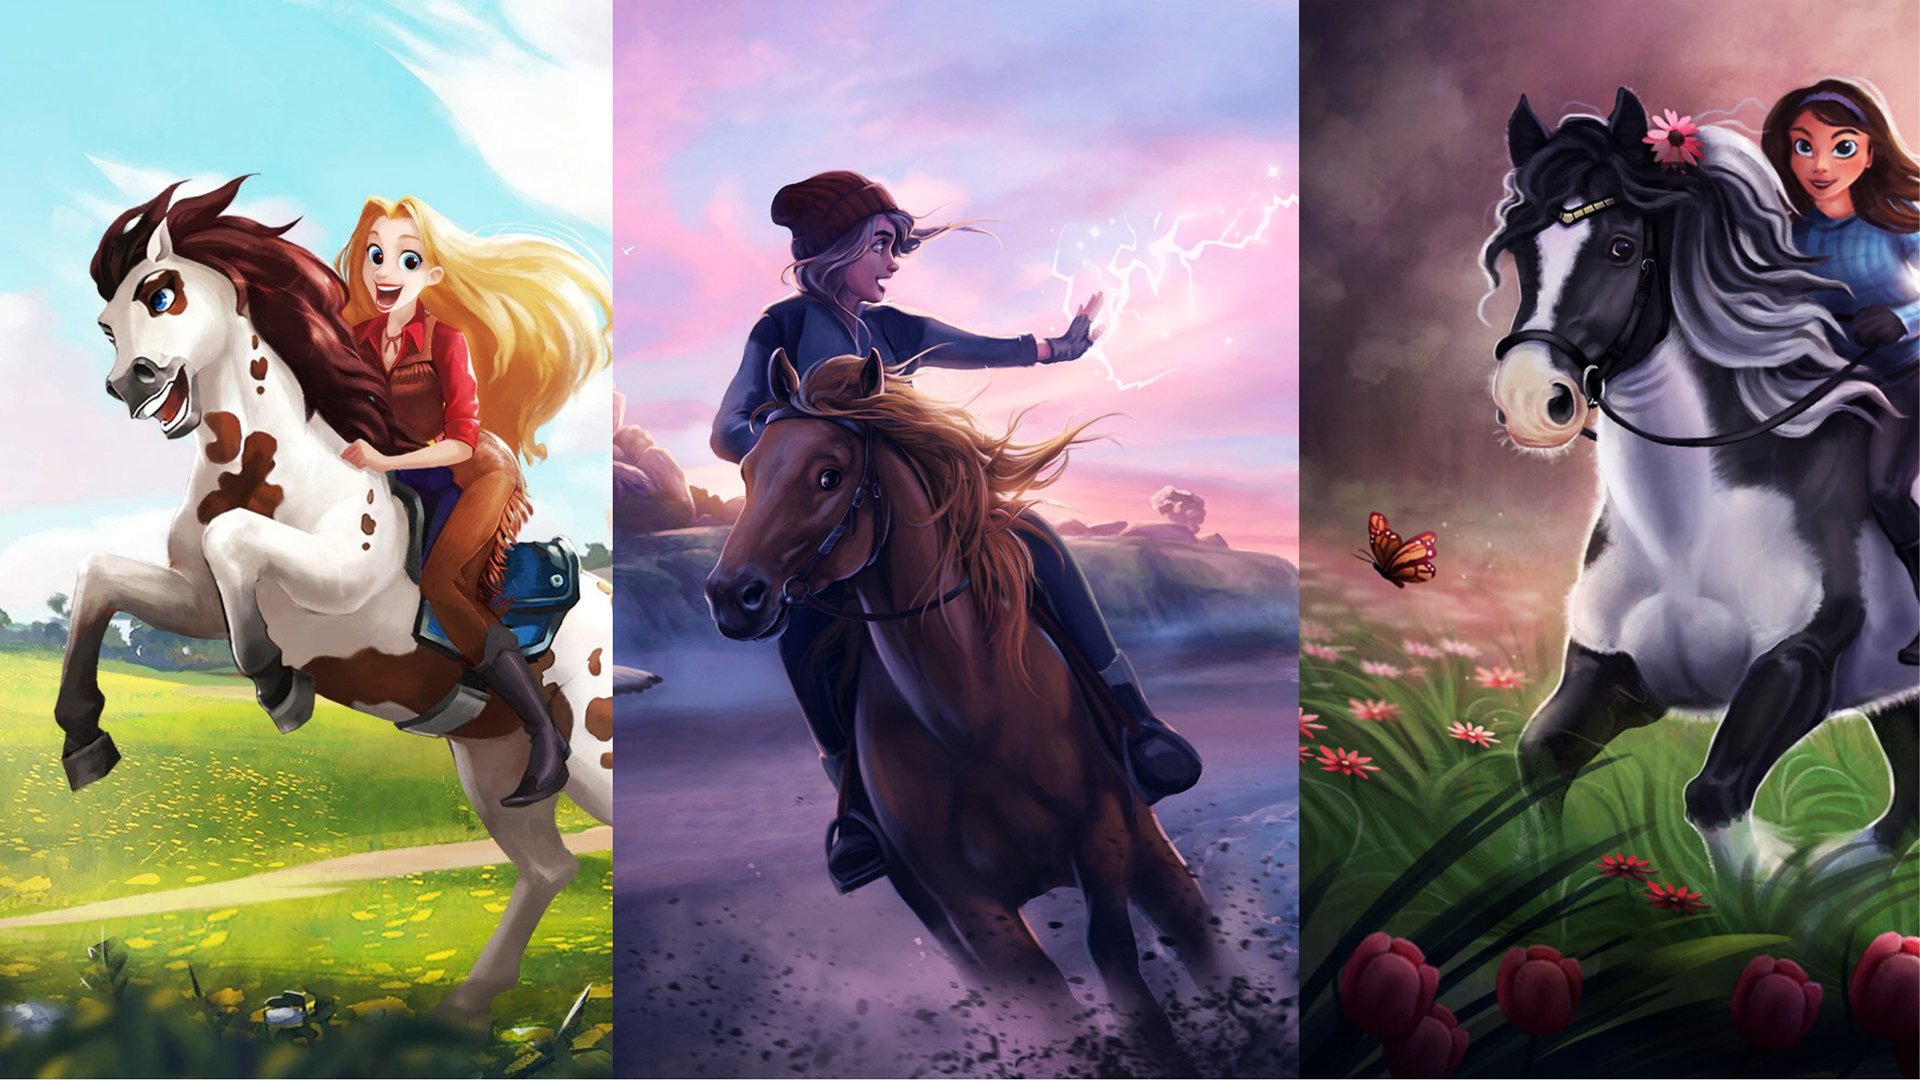 The Best Horse Games to play on PC and Console in 2022 — The Mane